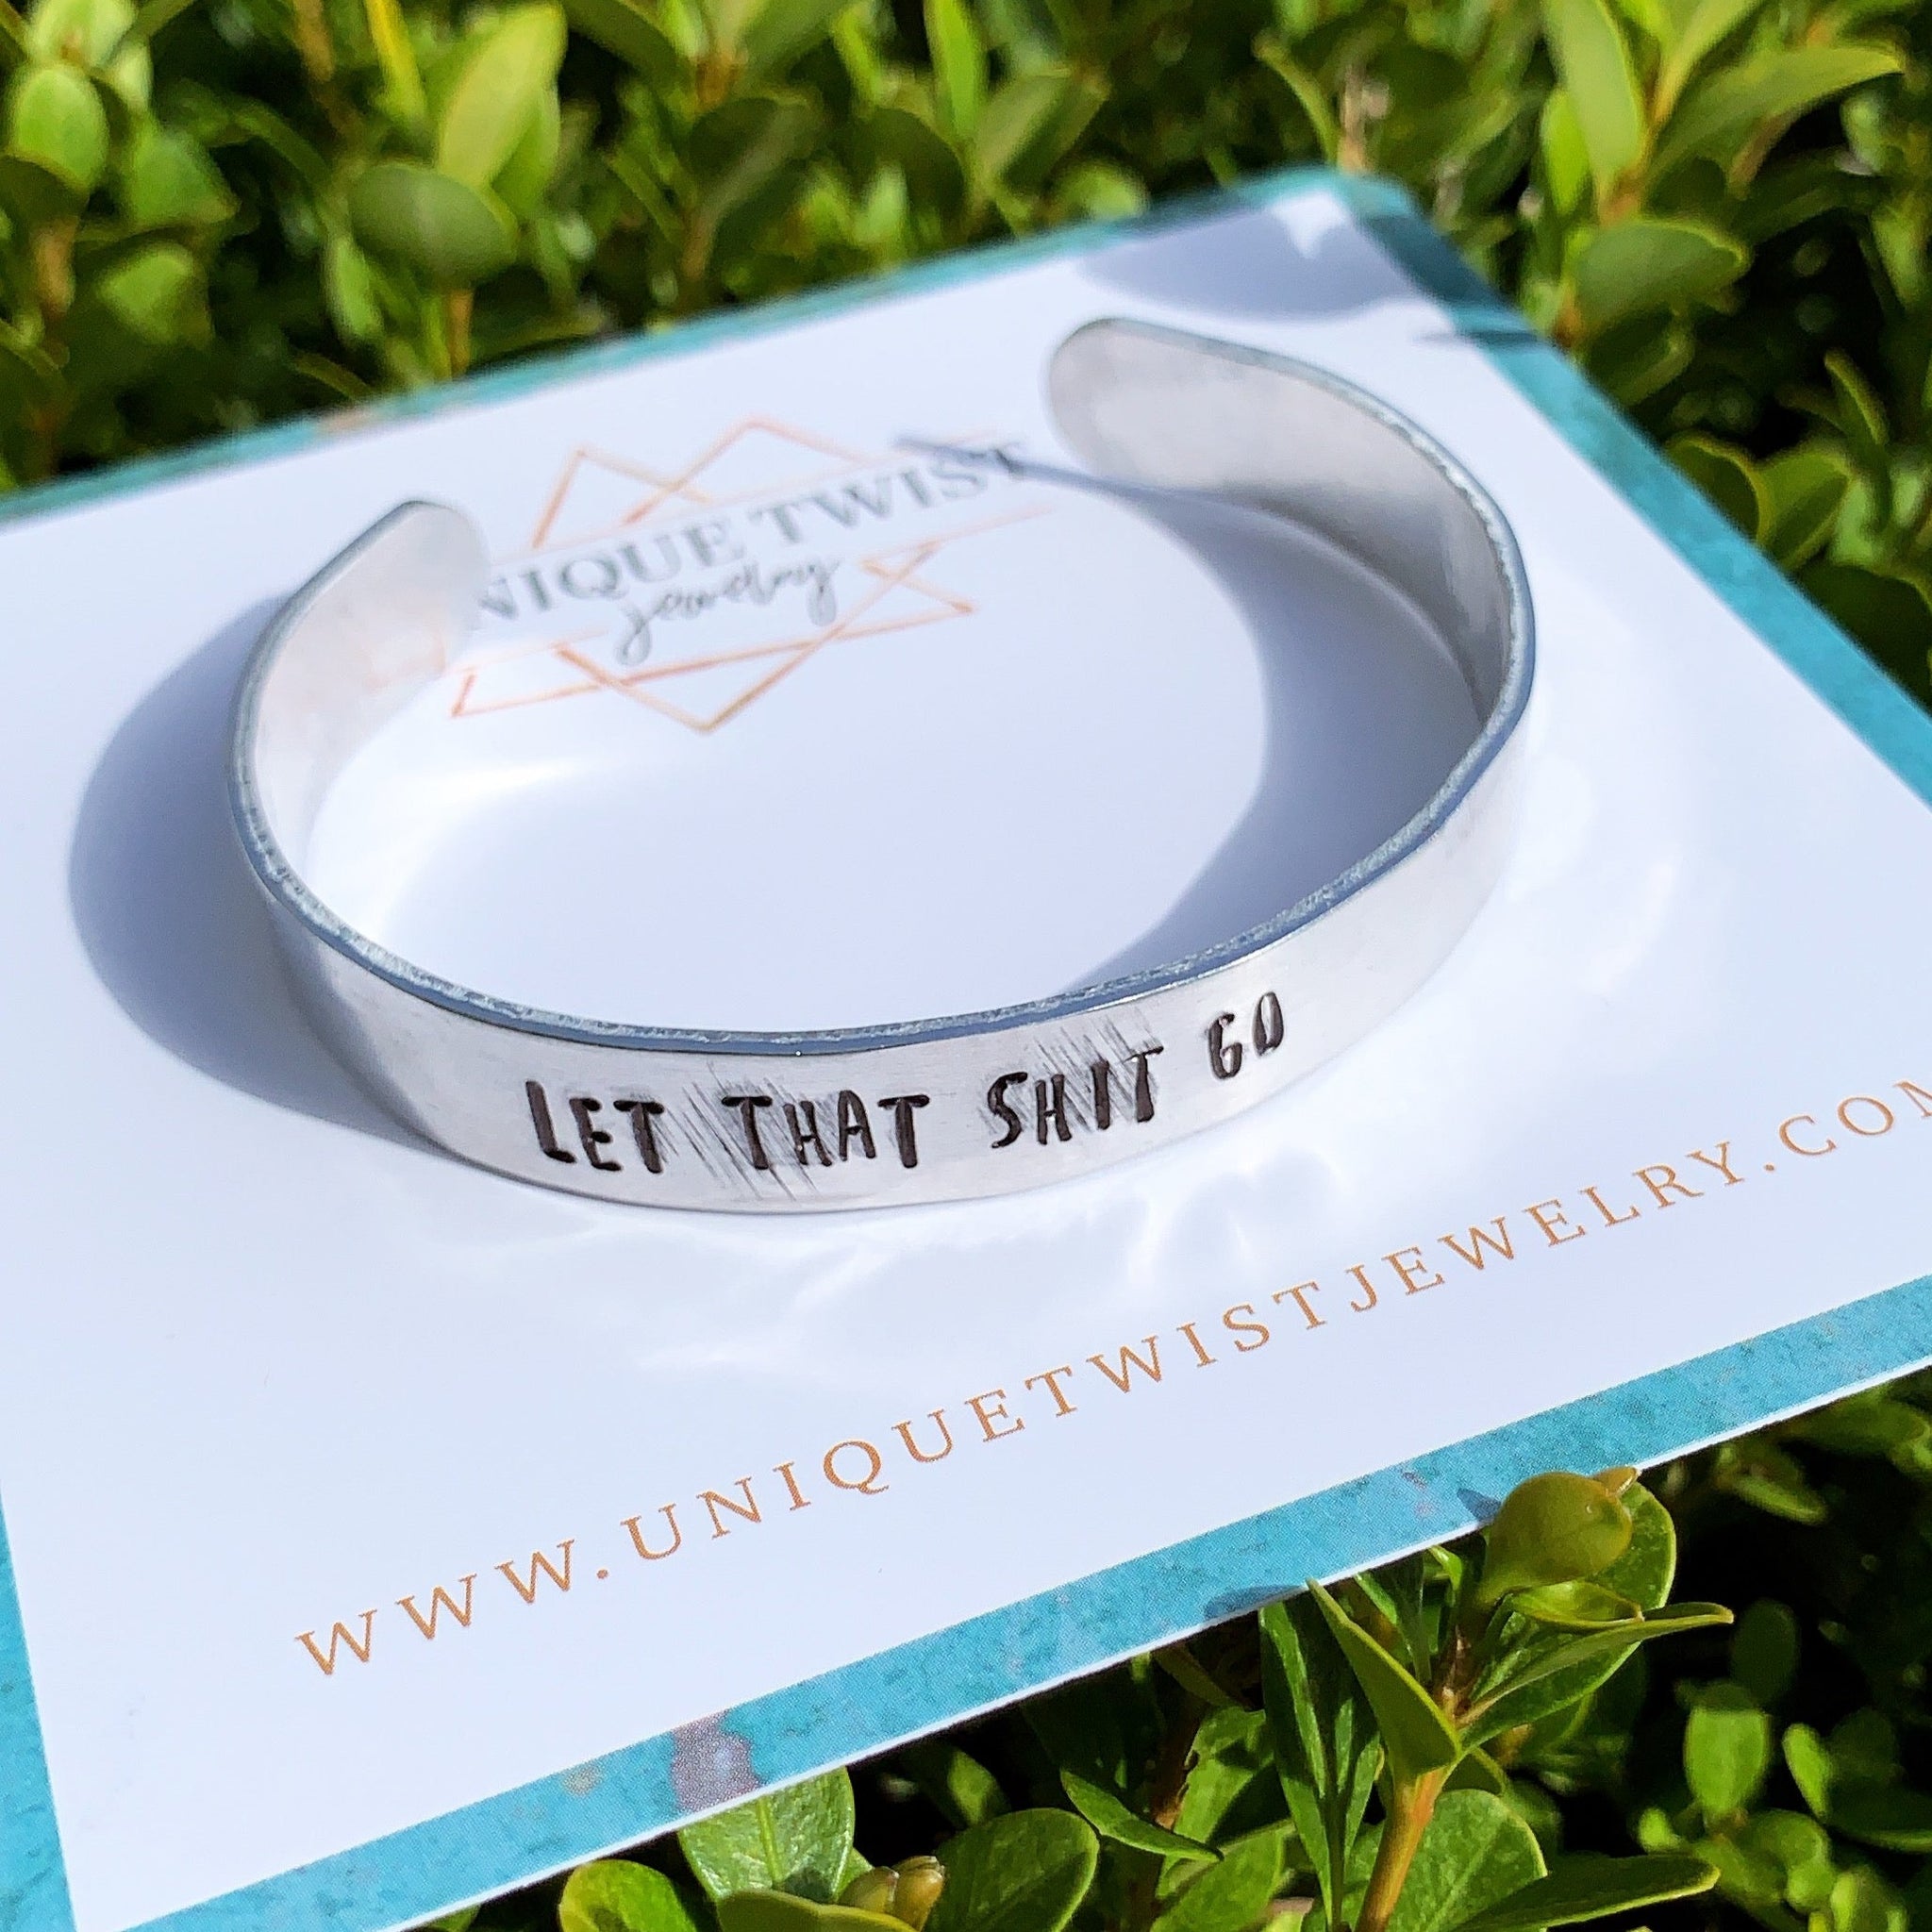 Aluminum "Let that shit go" Hand-Stamped Cuff Bracelet. Handmade jewelry by Unique Twist Jewelry.